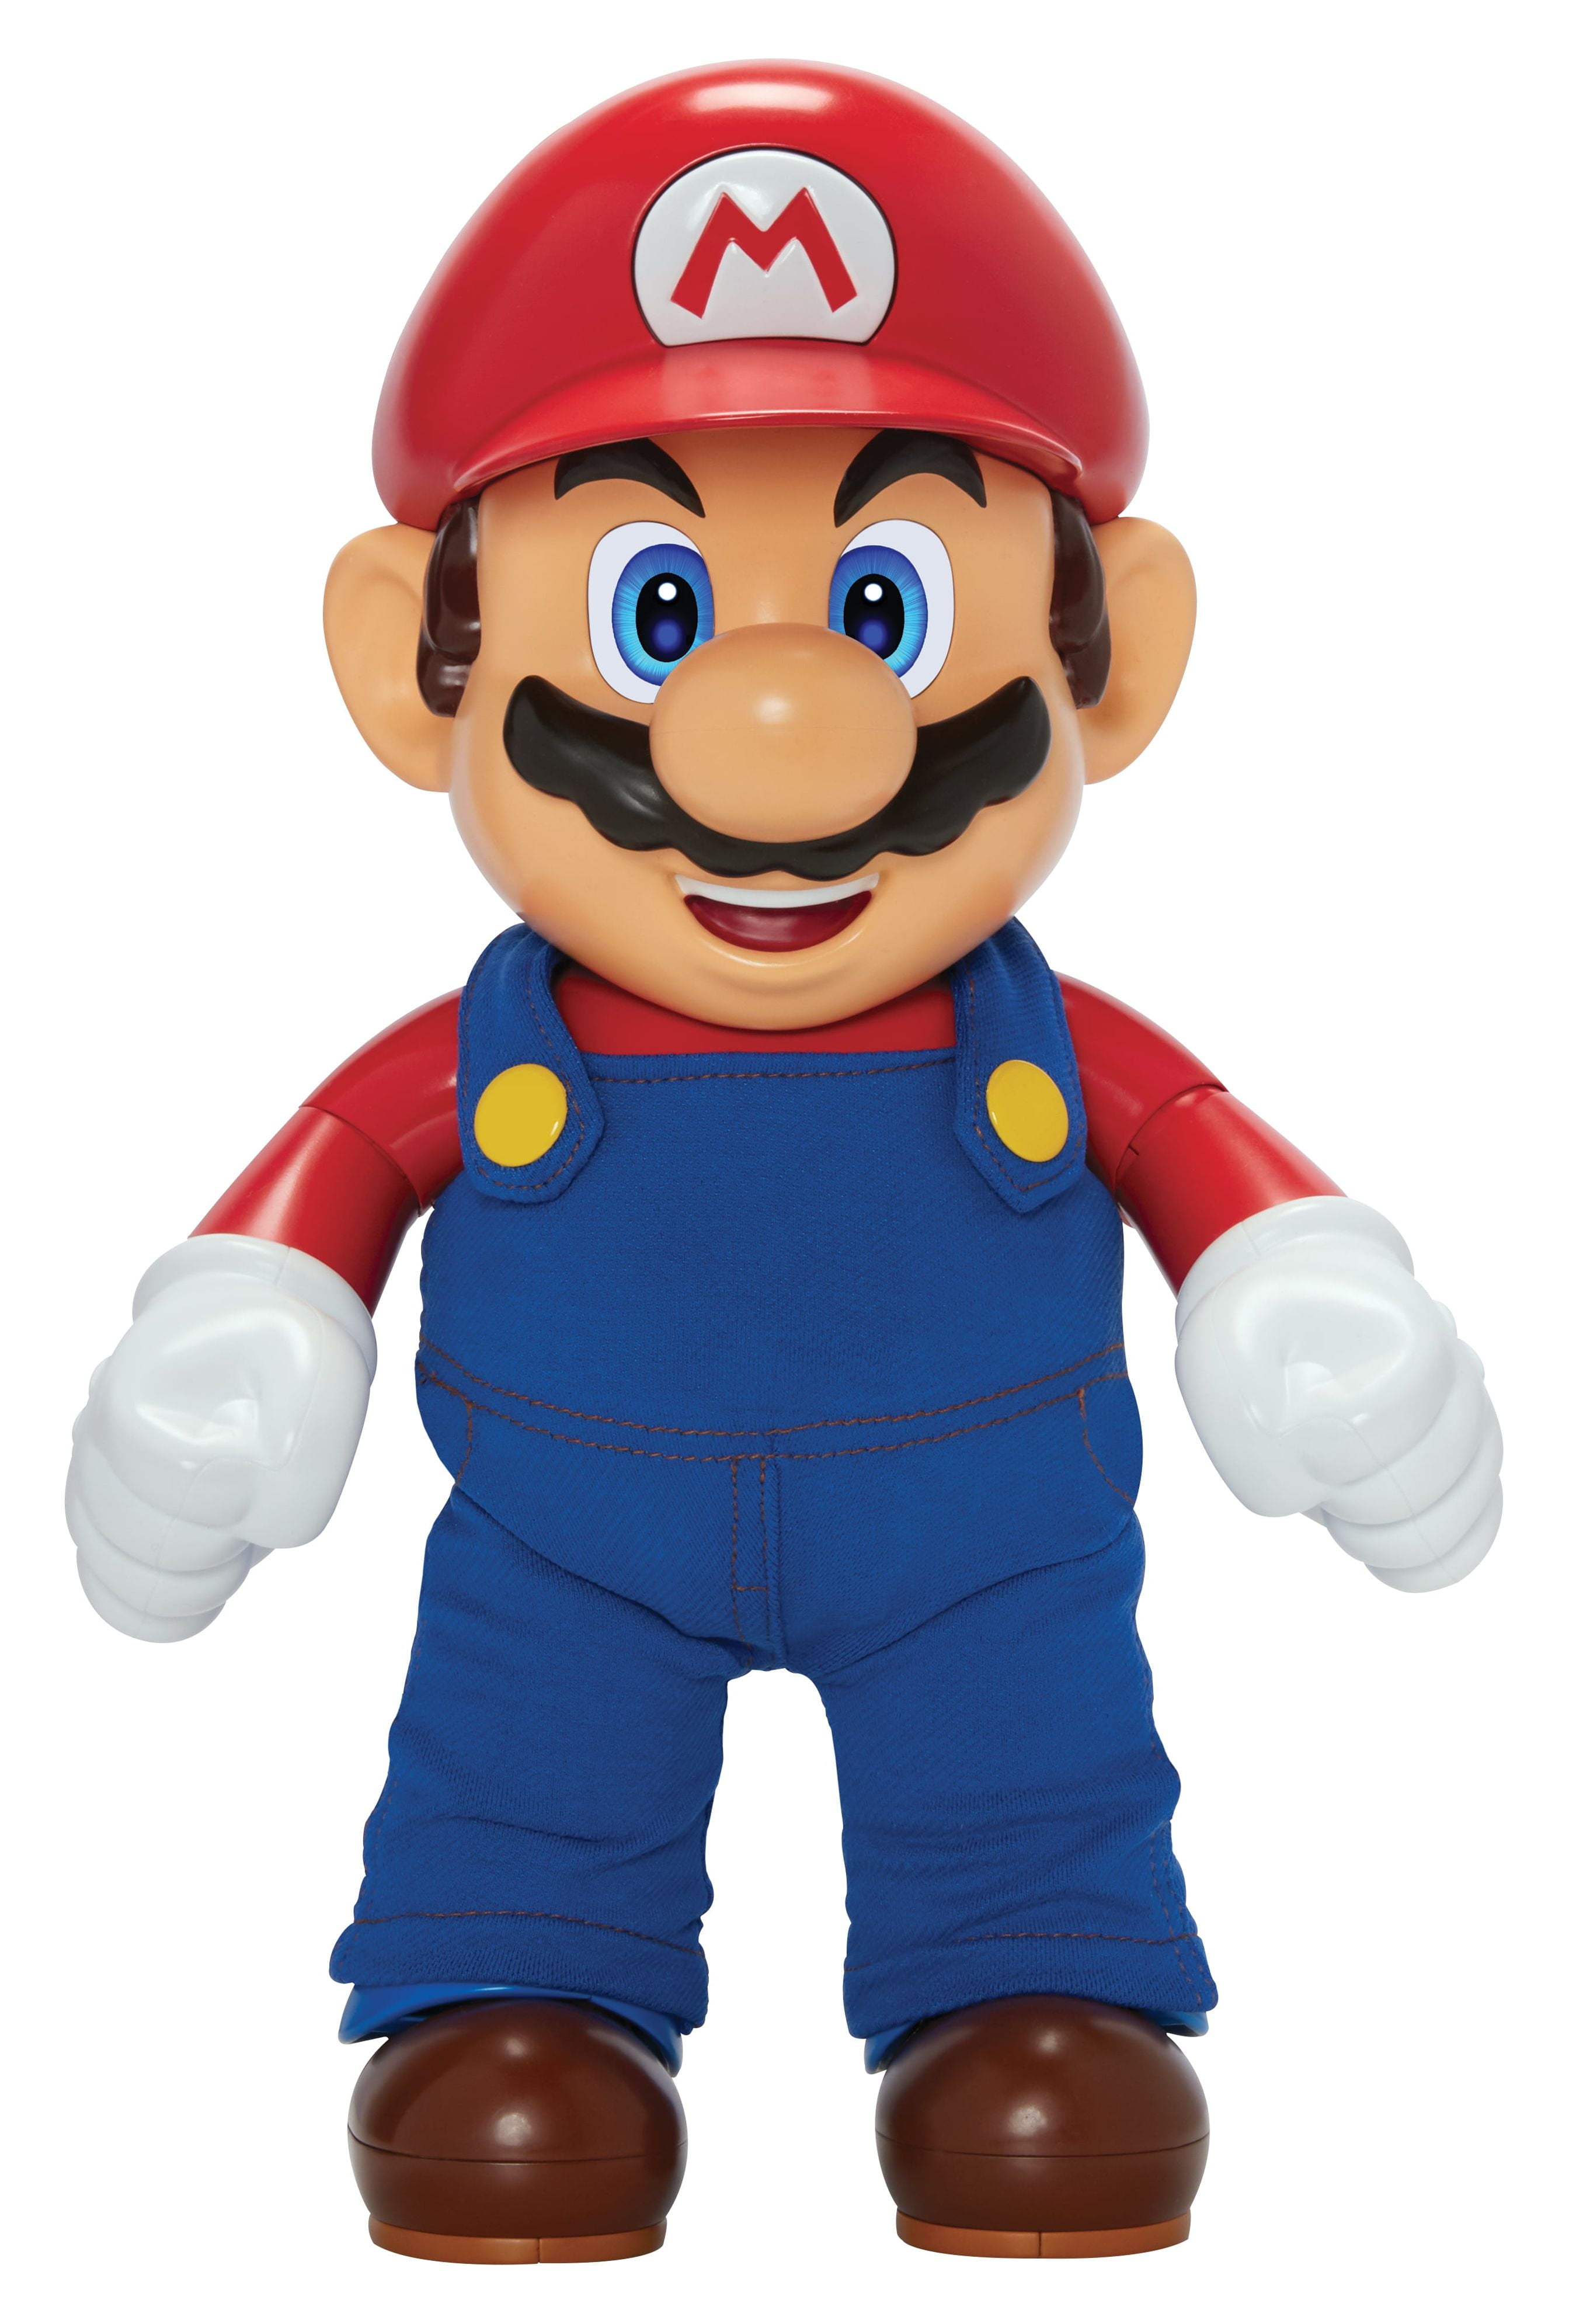 Mario Super Star Light with Sound - Officially Licensed Nintendo Merchandise